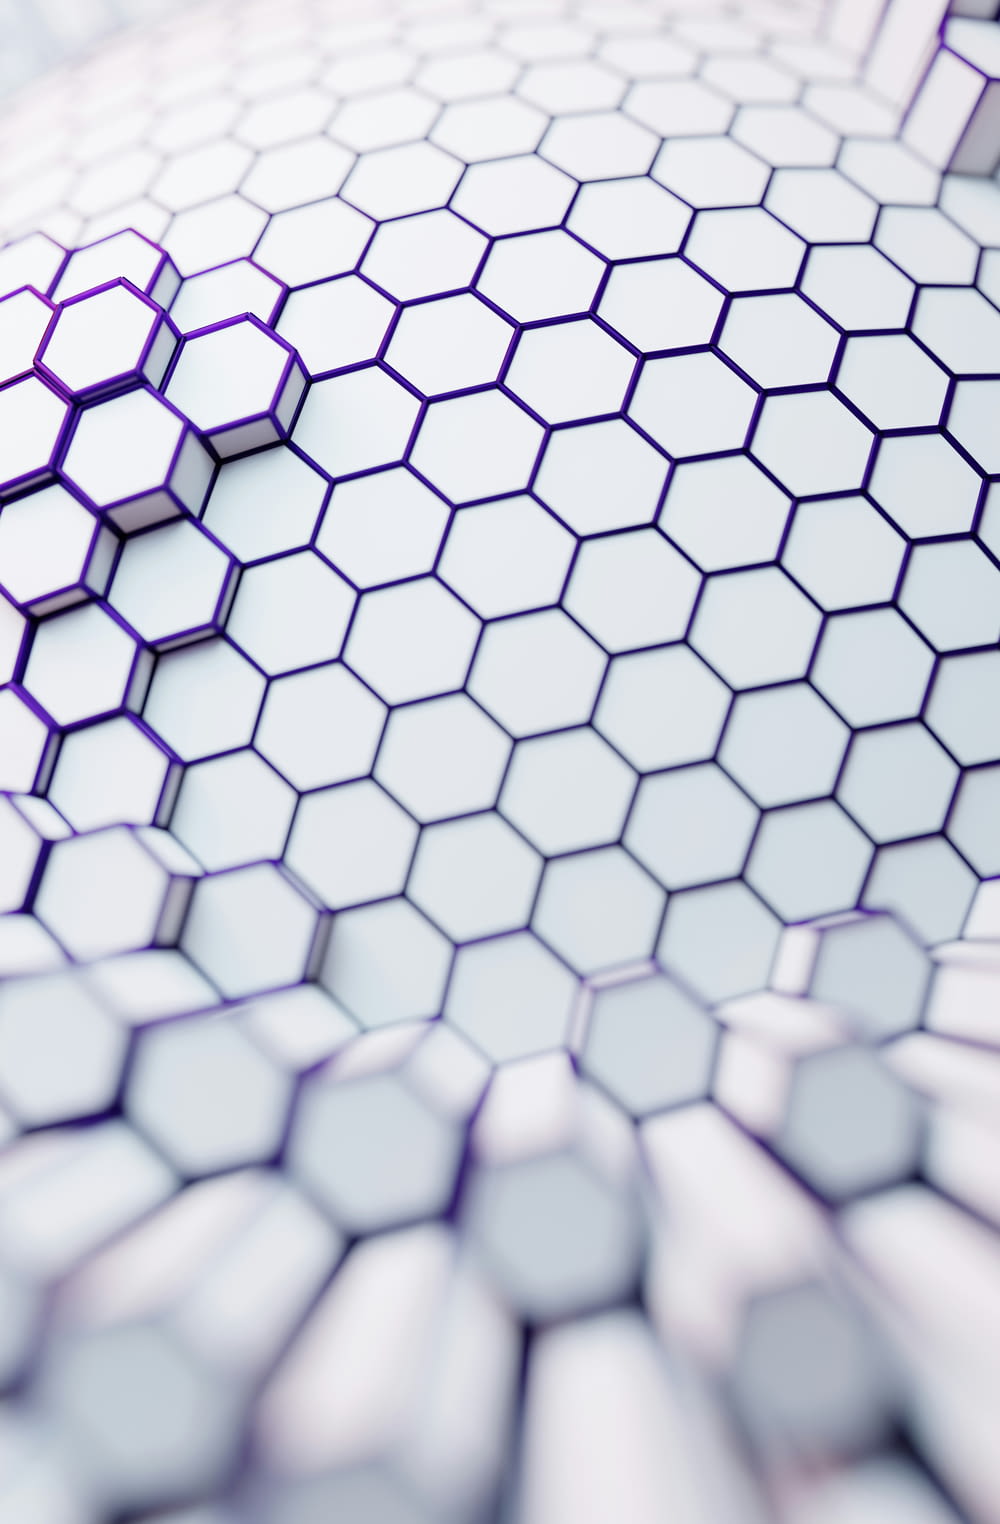 a close up of a white and purple hexagonal object